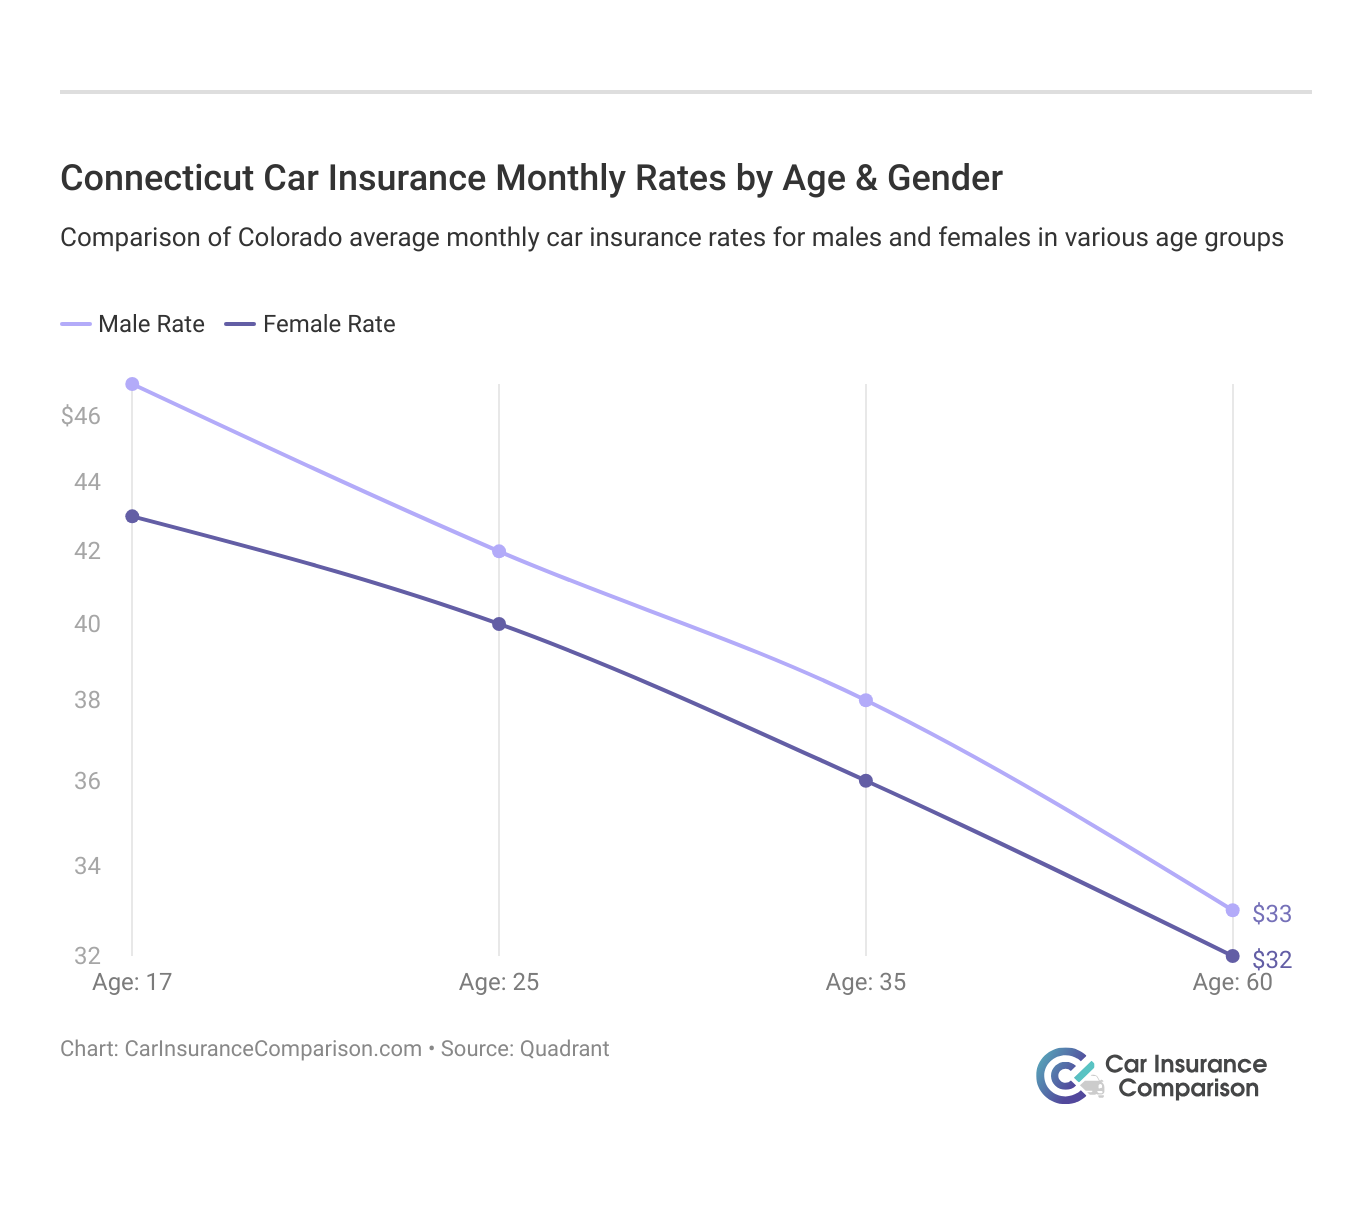 <h3>Connecticut Car Insurance Monthly Rates by Age & Gender</h3>